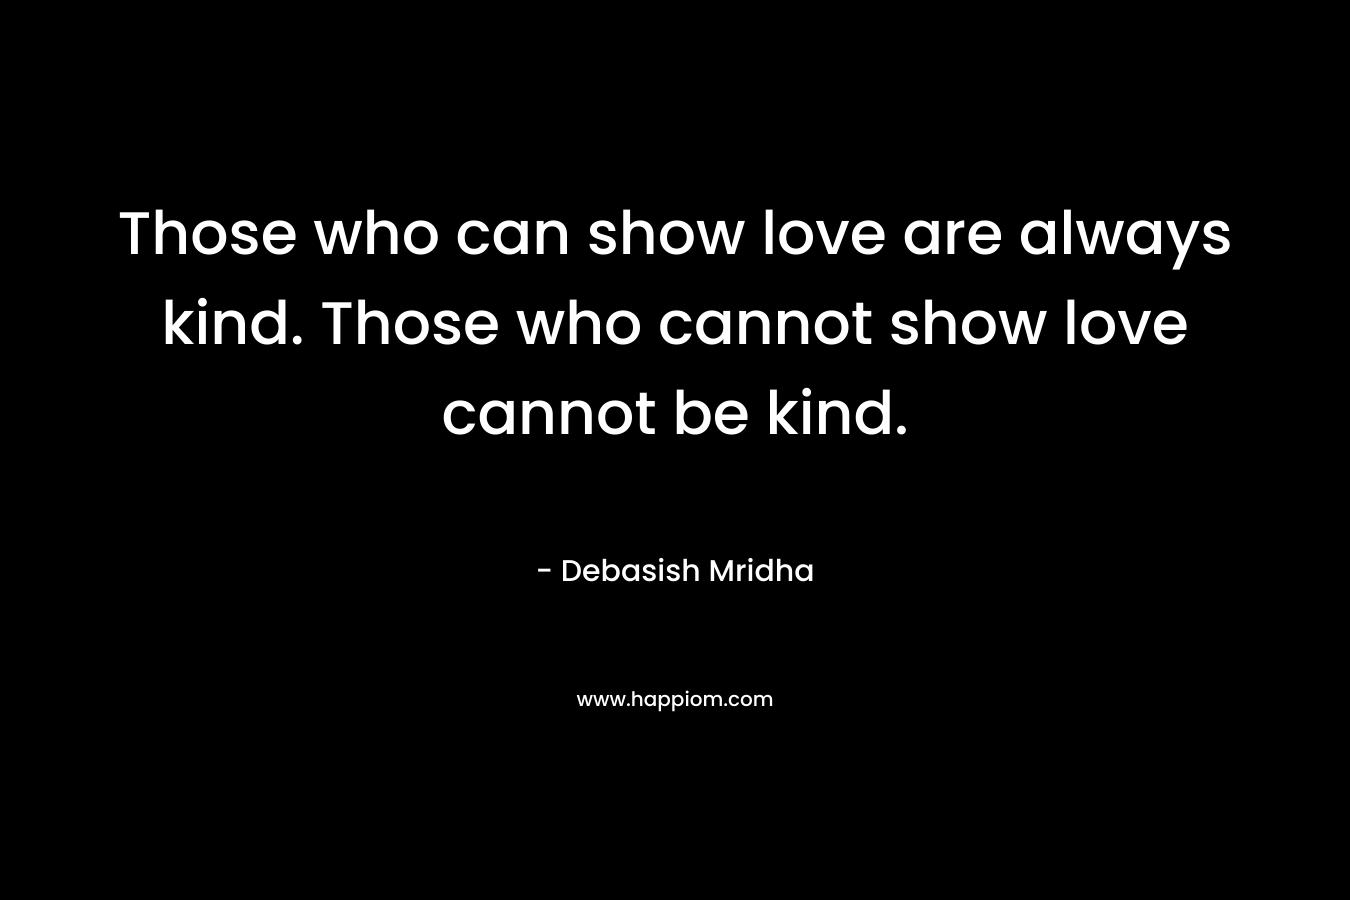 Those who can show love are always kind. Those who cannot show love cannot be kind.